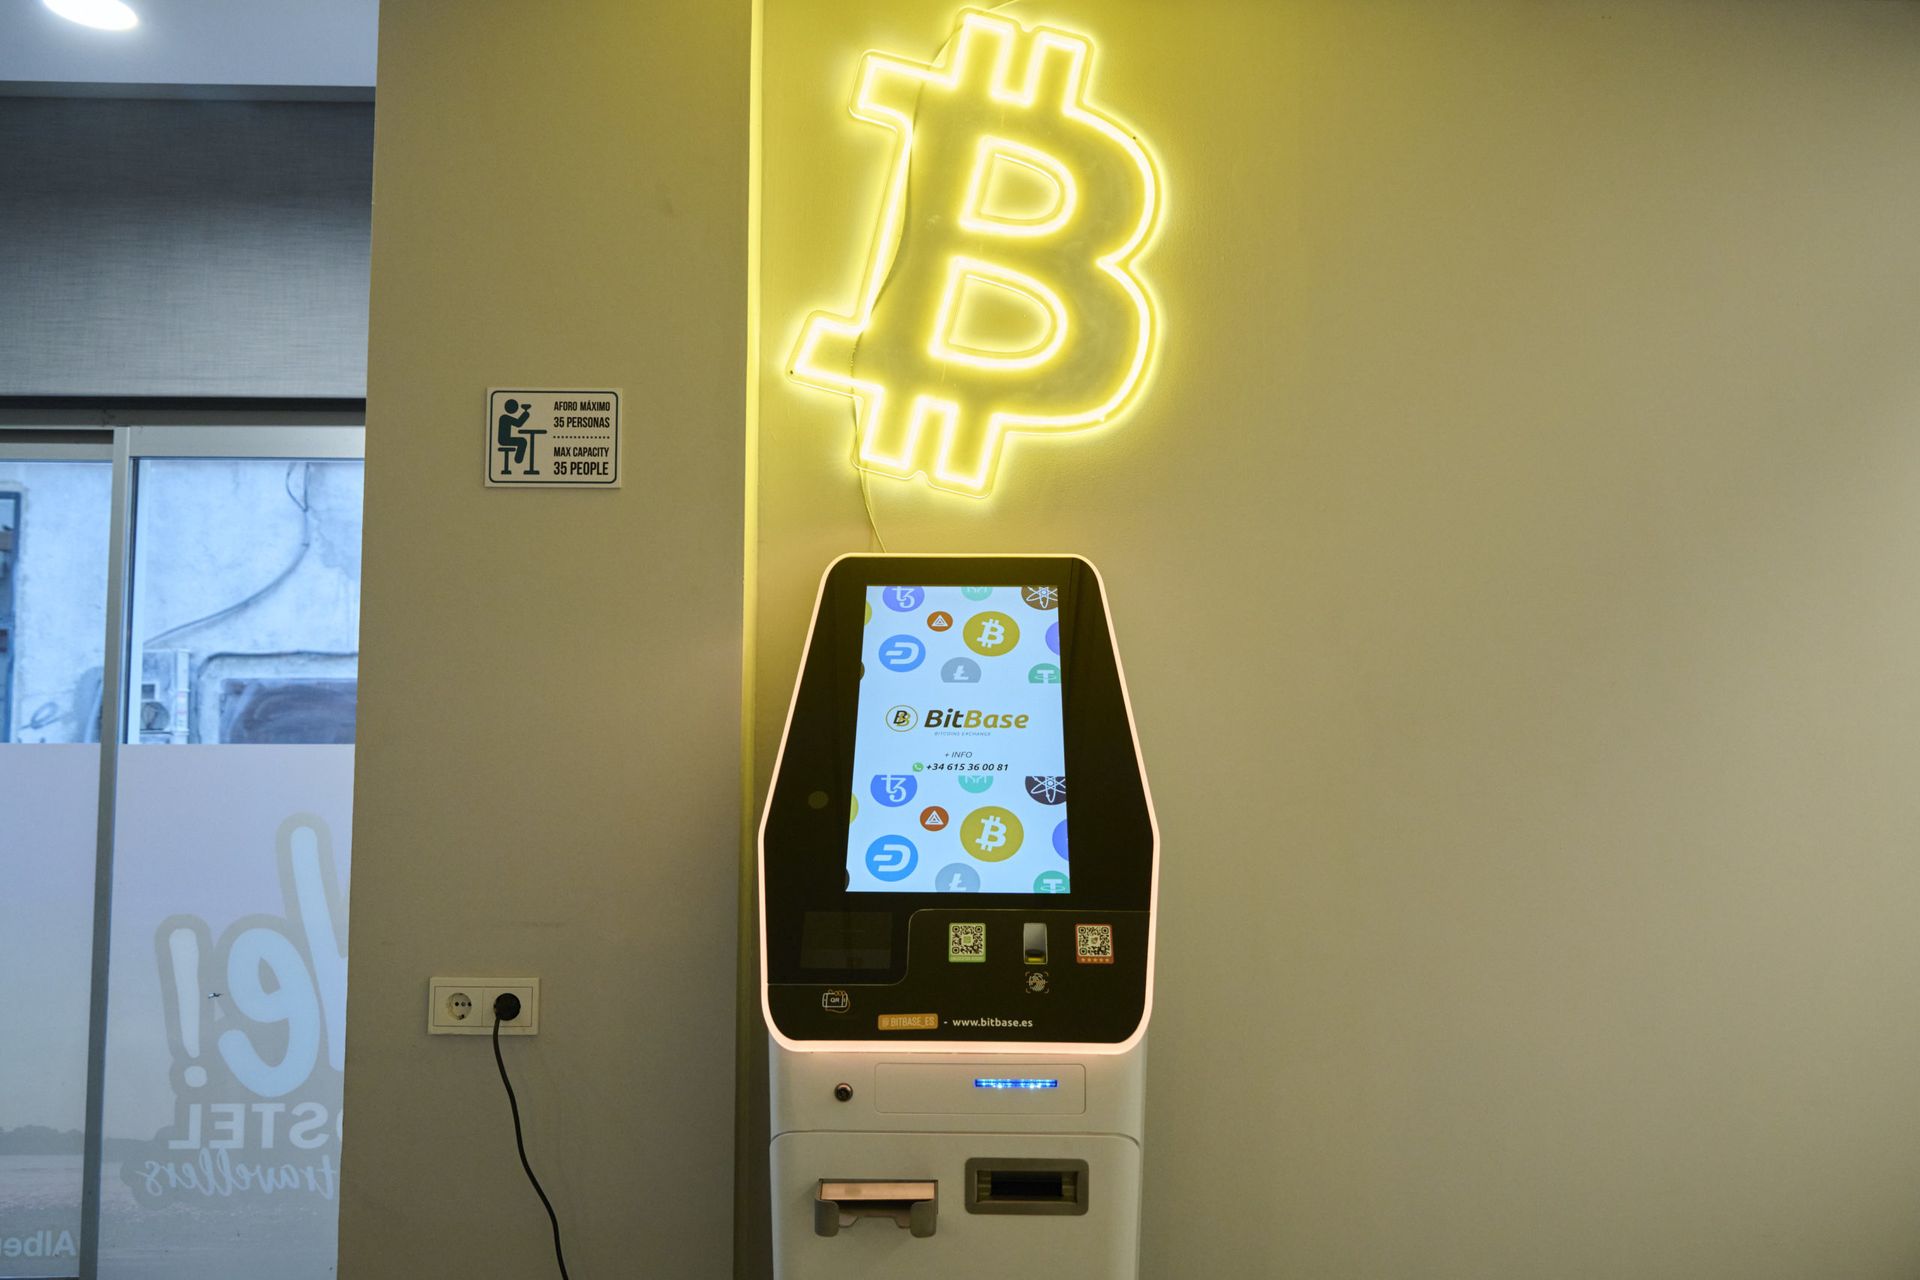 PALMA DE MALLORCA, SPAIN &#8211; AUGUST 09: A Bitcoin ATM is displayed at the We Hostel Gomila on August 09, 2021 in Palma de Mallorca, Spain. (Photo by Carlos Alvarez/Getty Images)